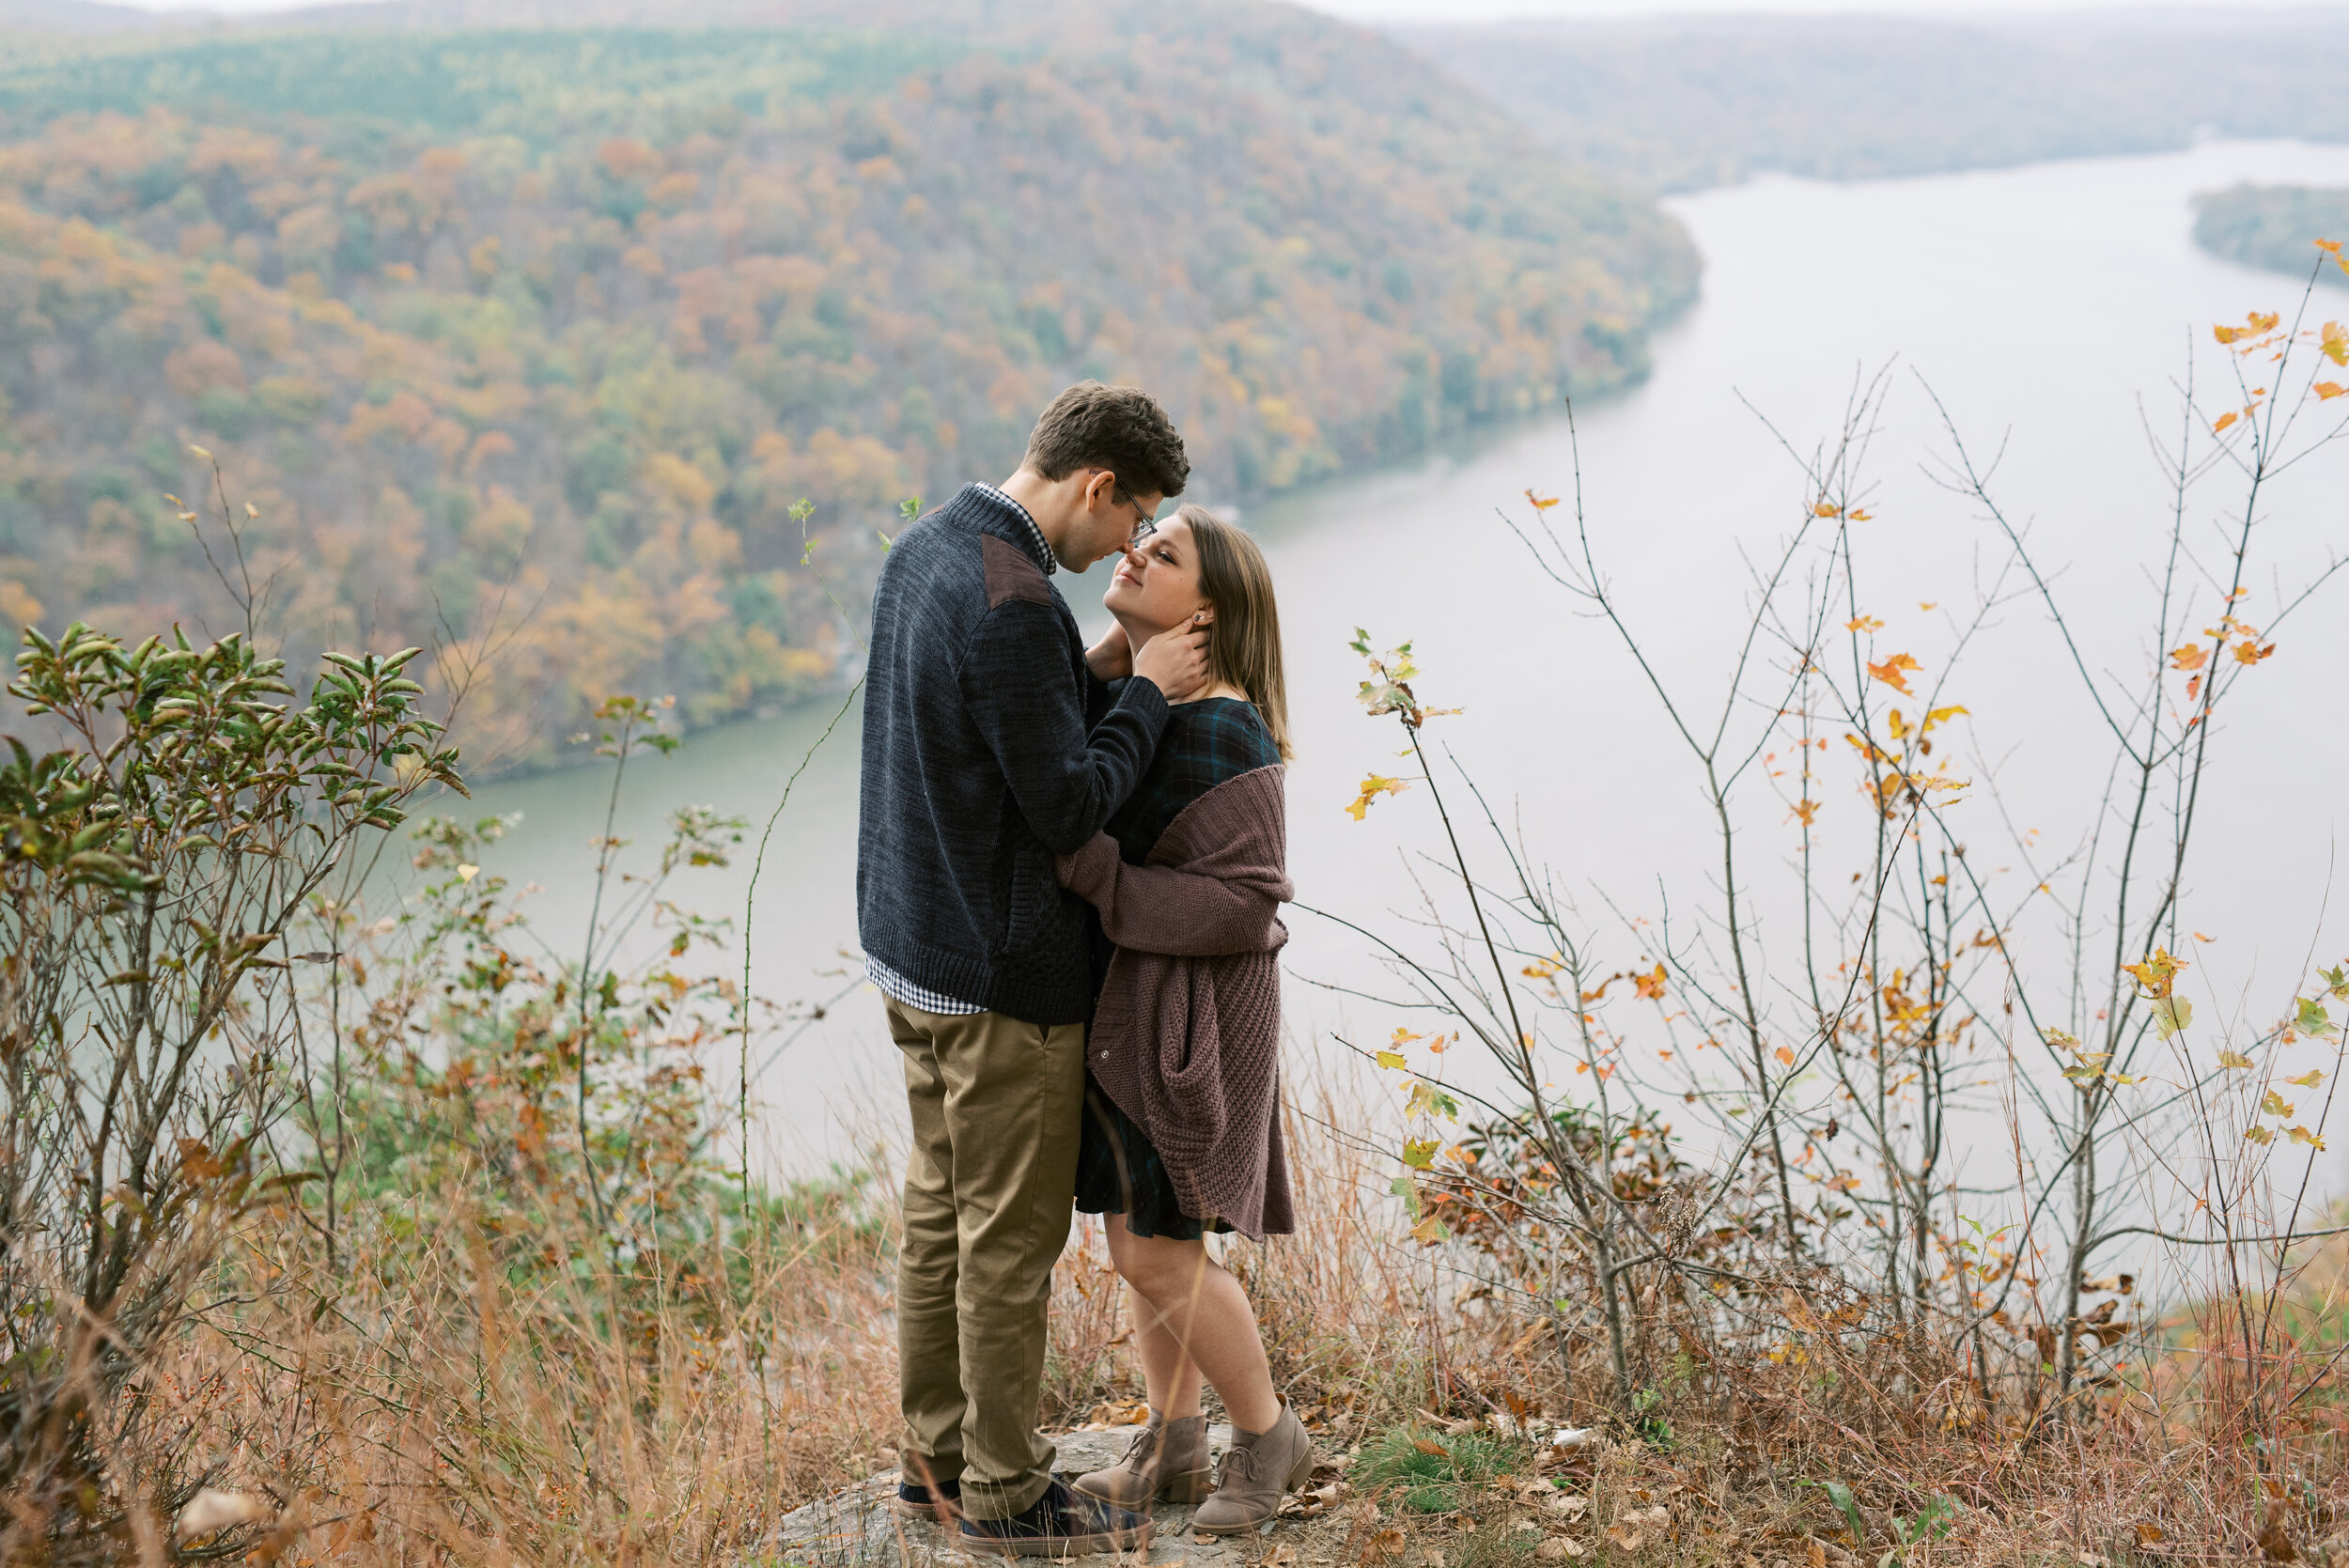 Couple gazing into each others eyes during an engagement shoot. Pinnacle overlook is in the background of the image.